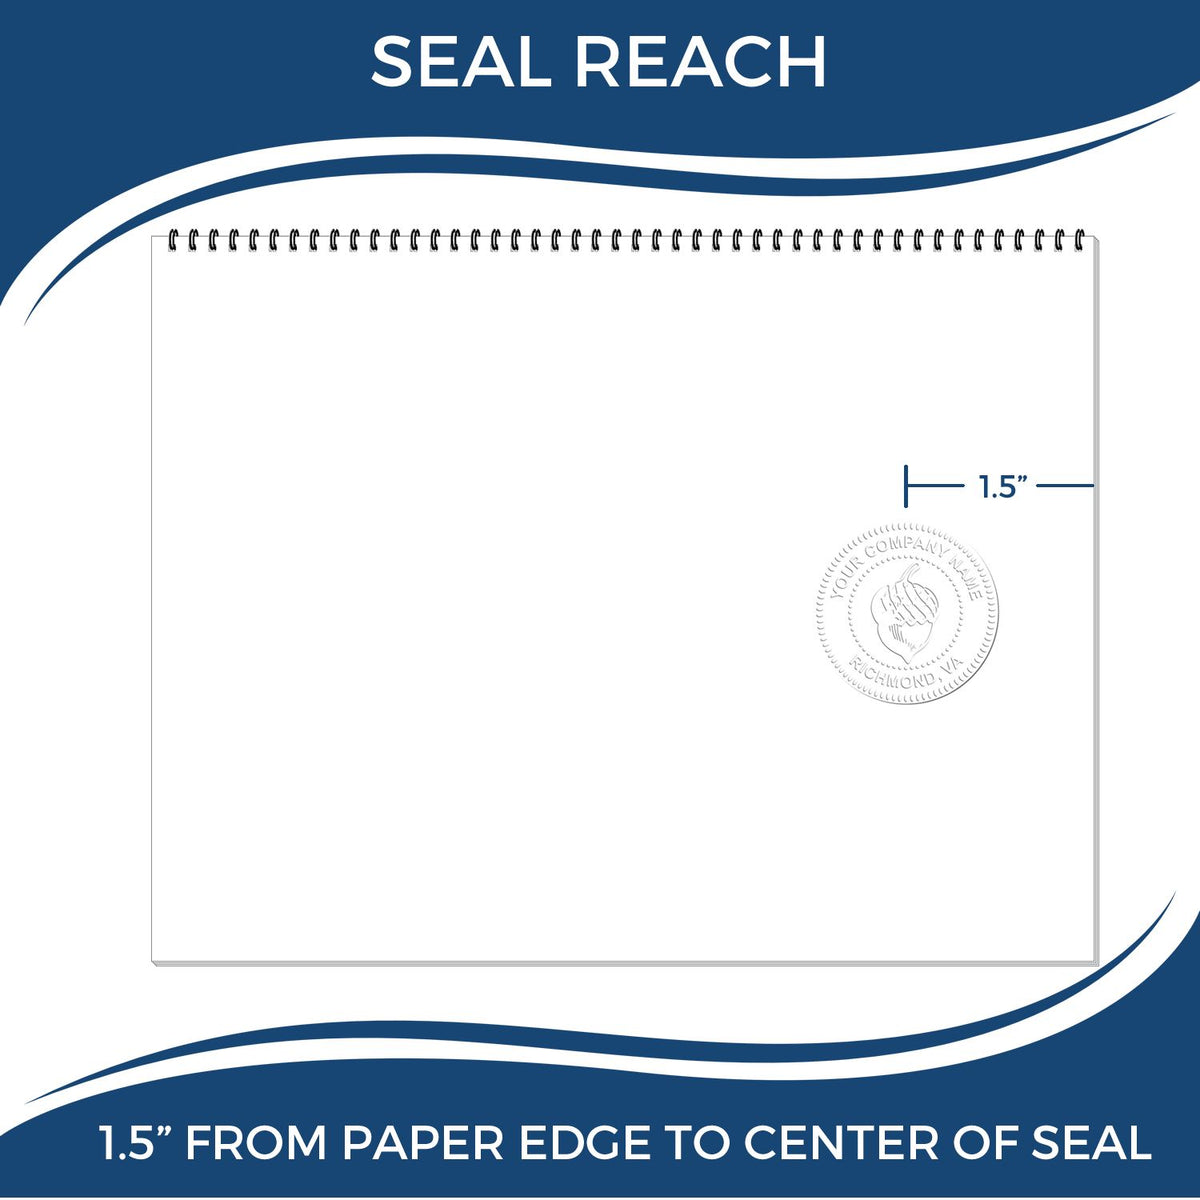 An infographic showing the seal reach which is represented by a ruler and a miniature seal image of the Handheld Mississippi Professional Engineer Embosser